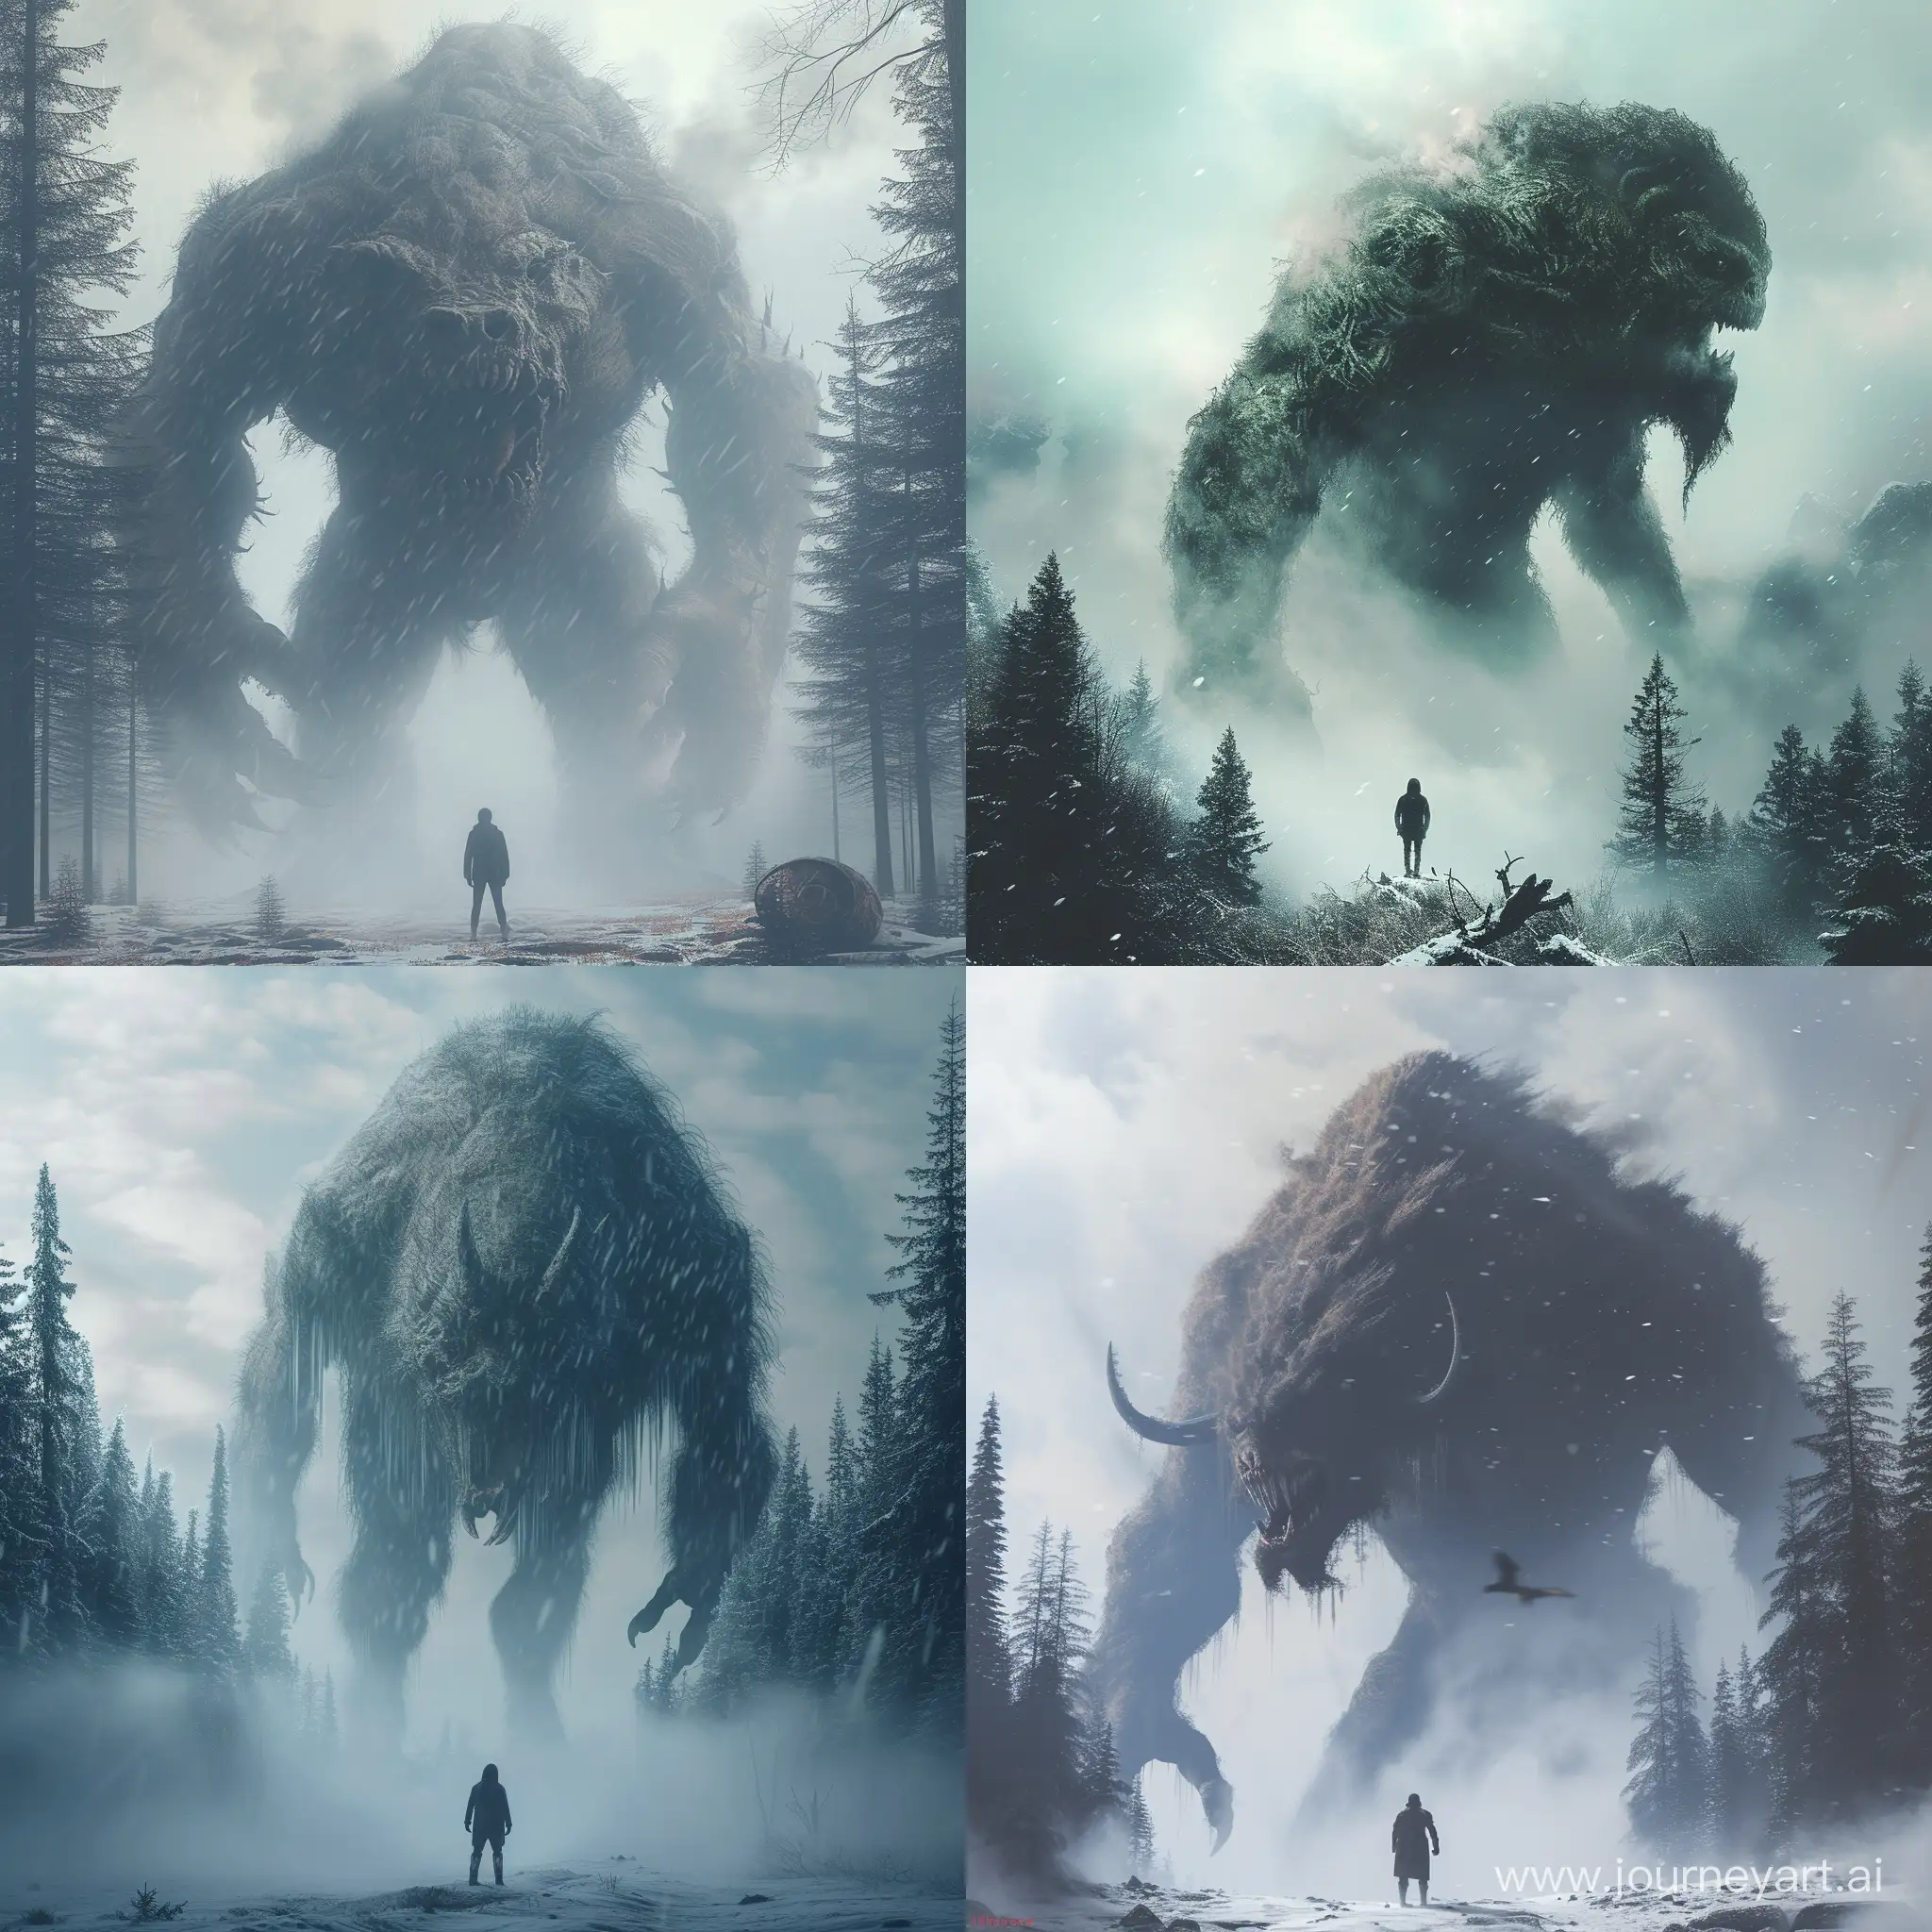 Enormous-Mythical-Beast-Encounter-in-Misty-Forest